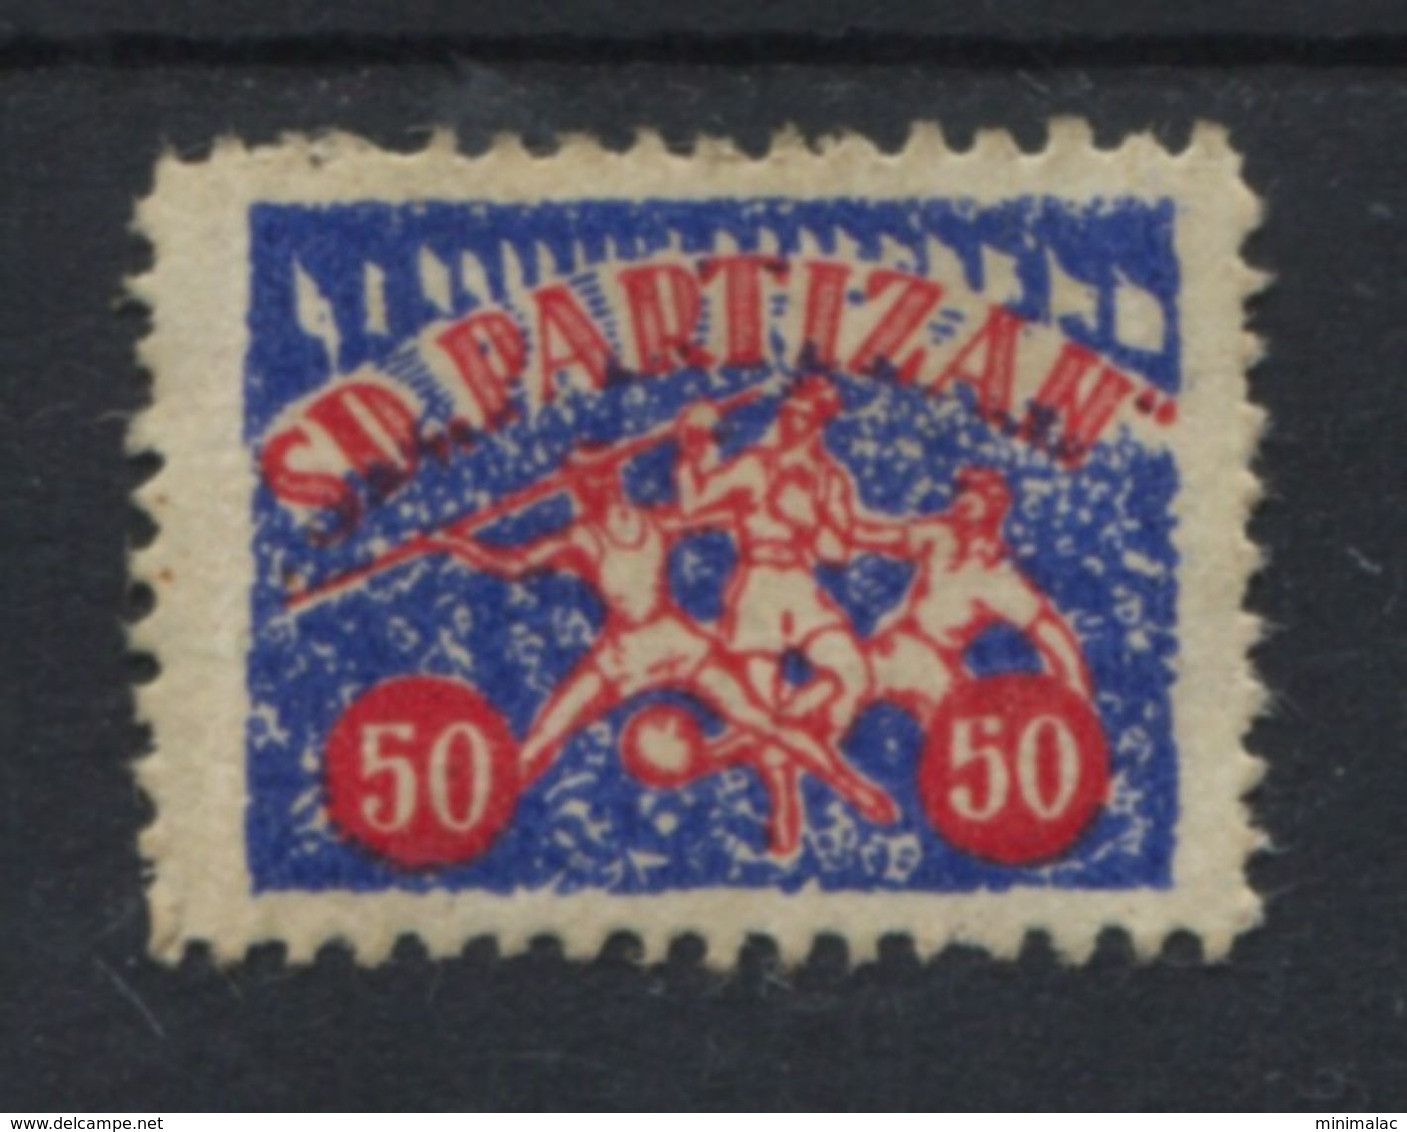 Yugoslavia 60th, Sports Society Partizan, Stamp For Membership, Sport, Boxing, Football, Throwing Spears - Dienstzegels